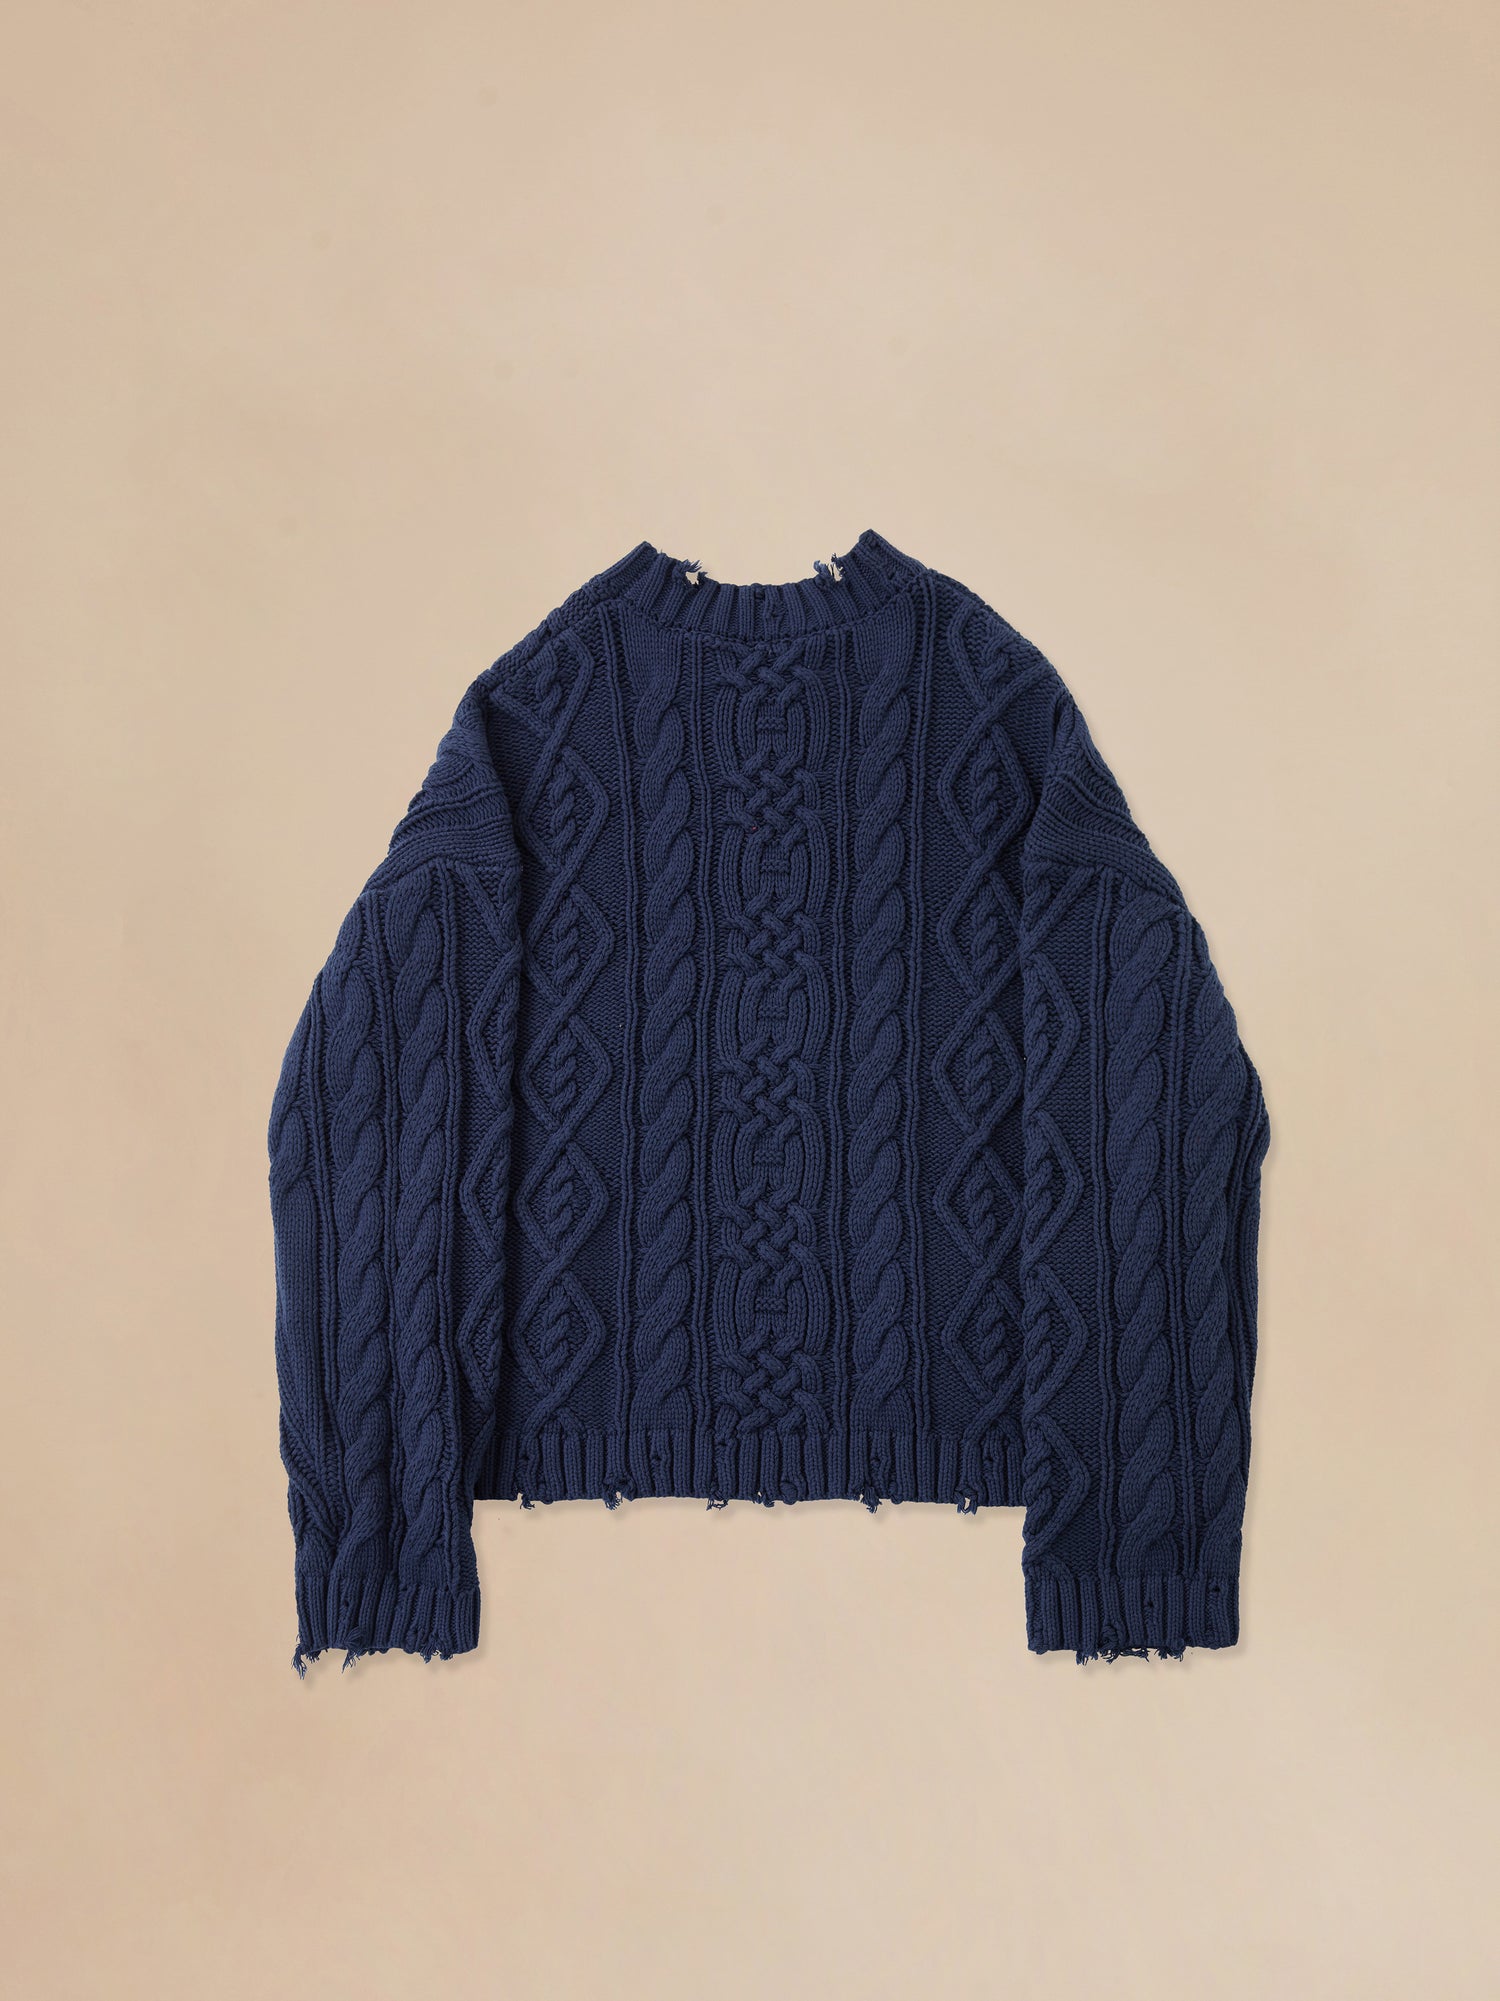 A Found Astral Distressed Cable Knit Sweater in a blue color.